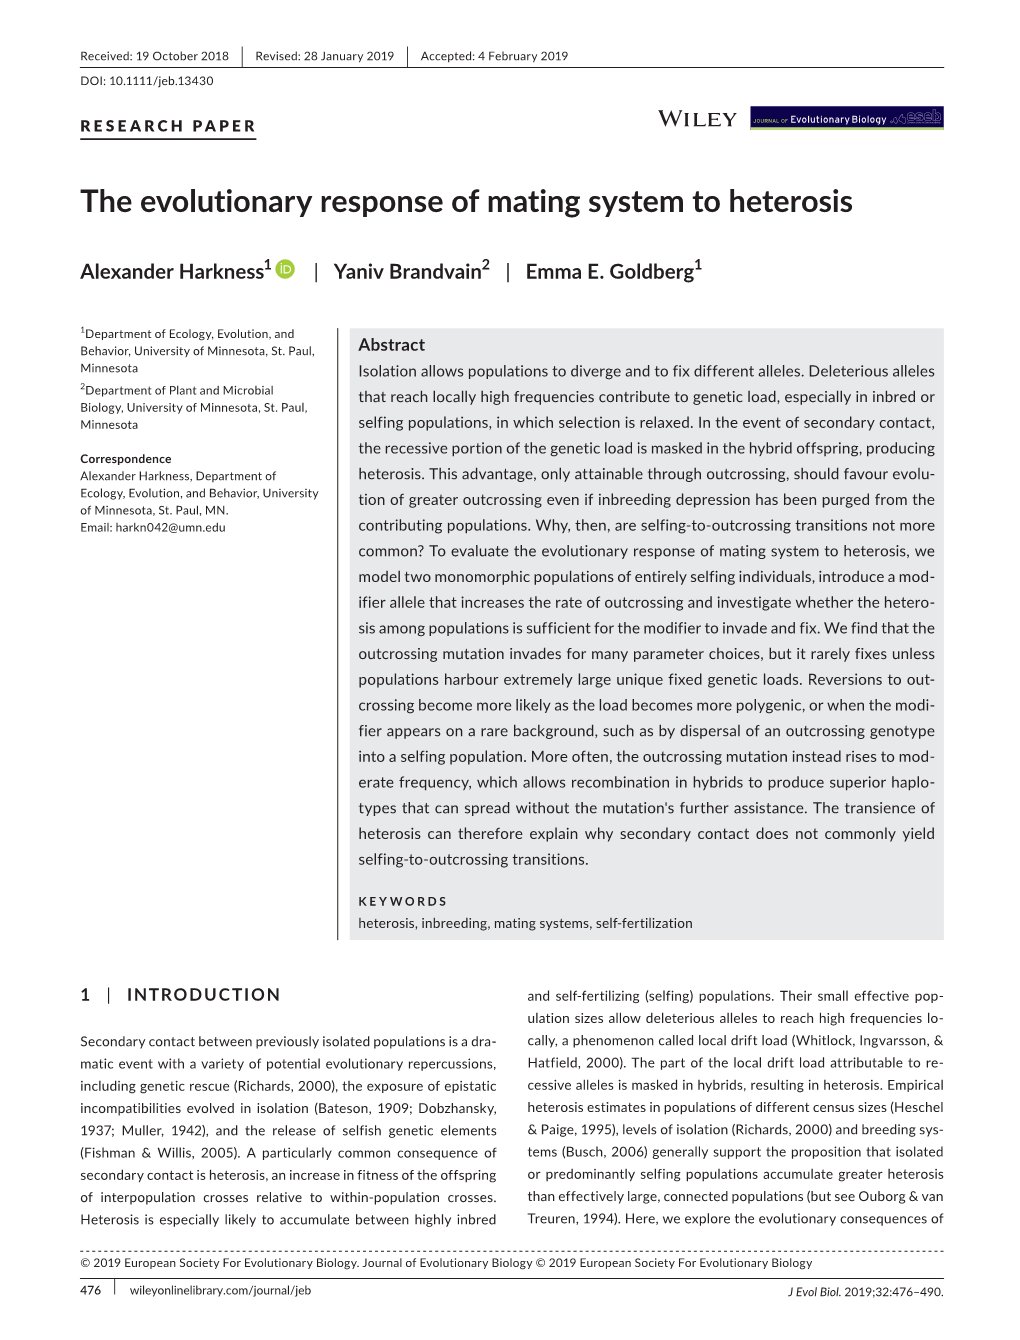 The Evolutionary Response of Mating System to Heterosis